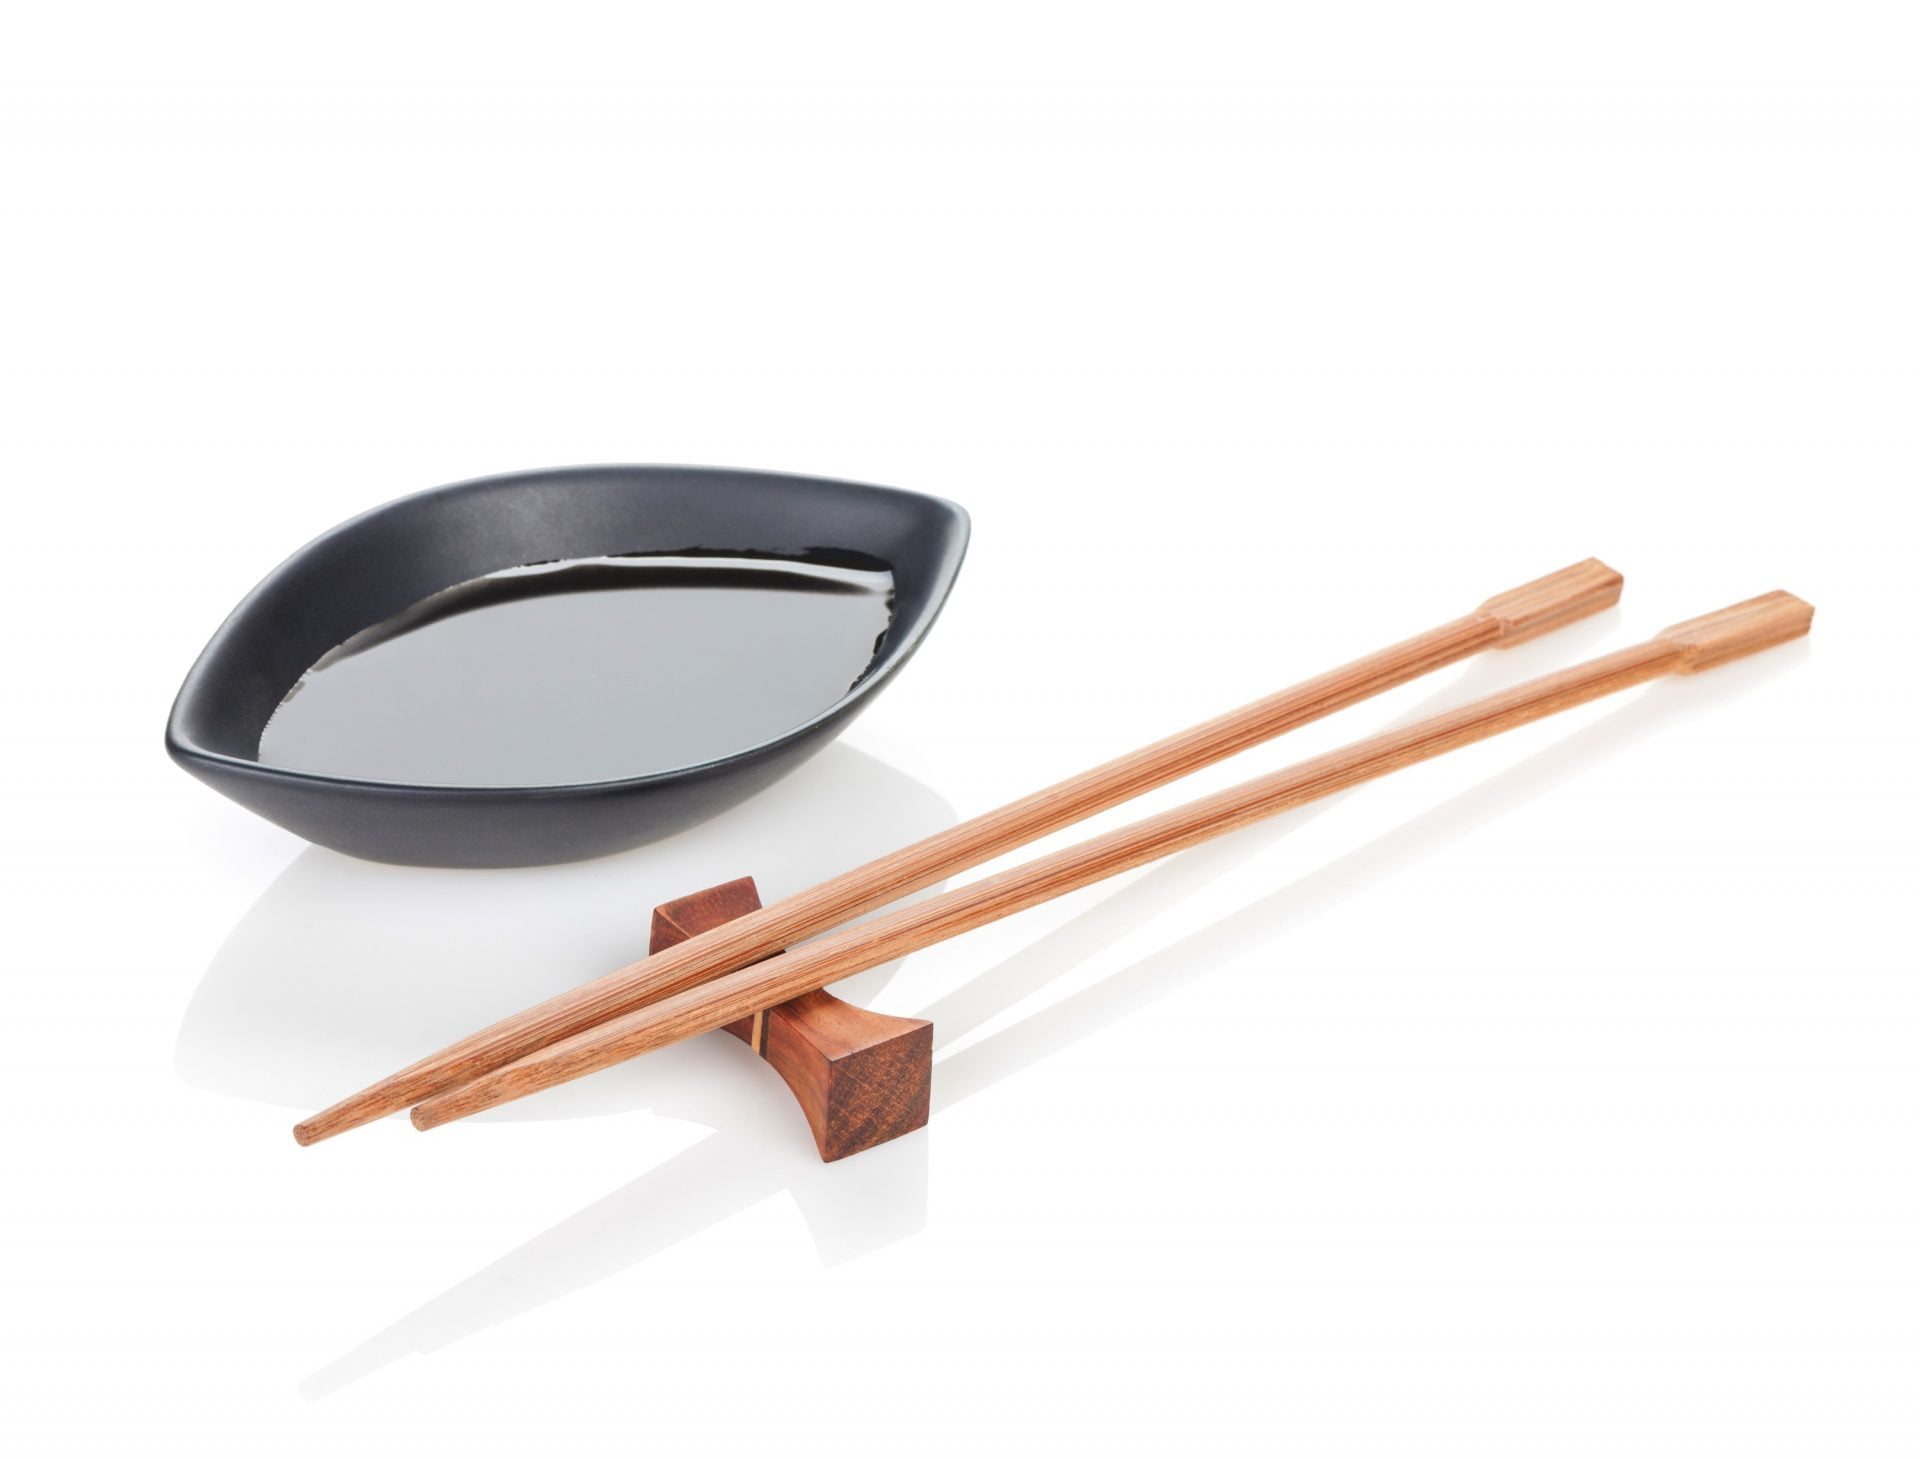 Chop sticks and bowl of soy sauce